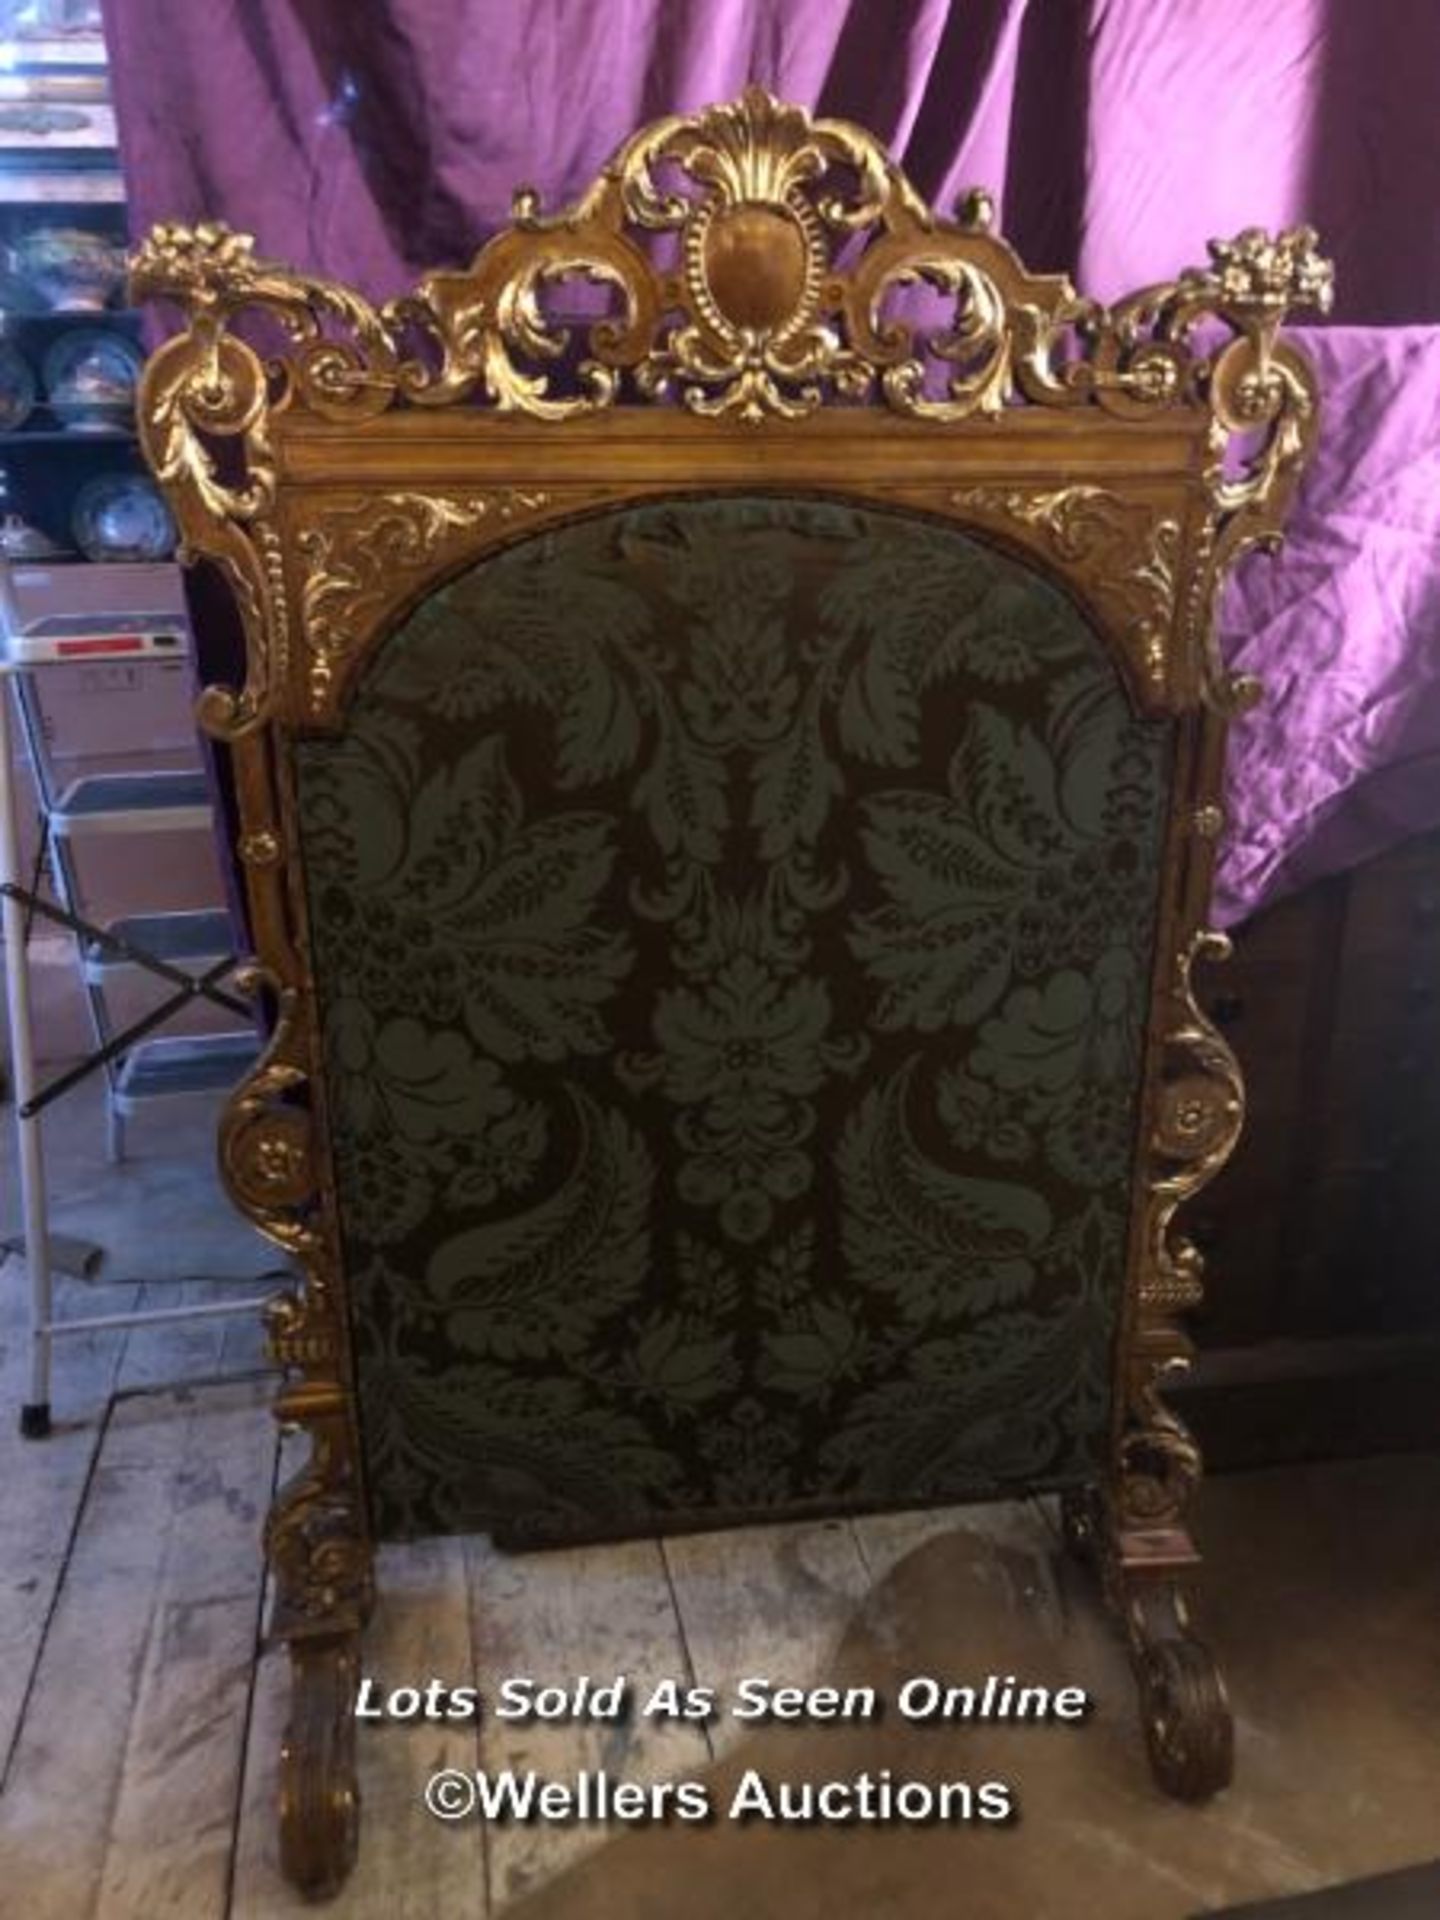 LARGE AND IMPRESSIVE FIRE SCREEN, ITALIAN ORIGIN, WITH EXTENSIVE CARVING AND GILDING, 88 X 40 X